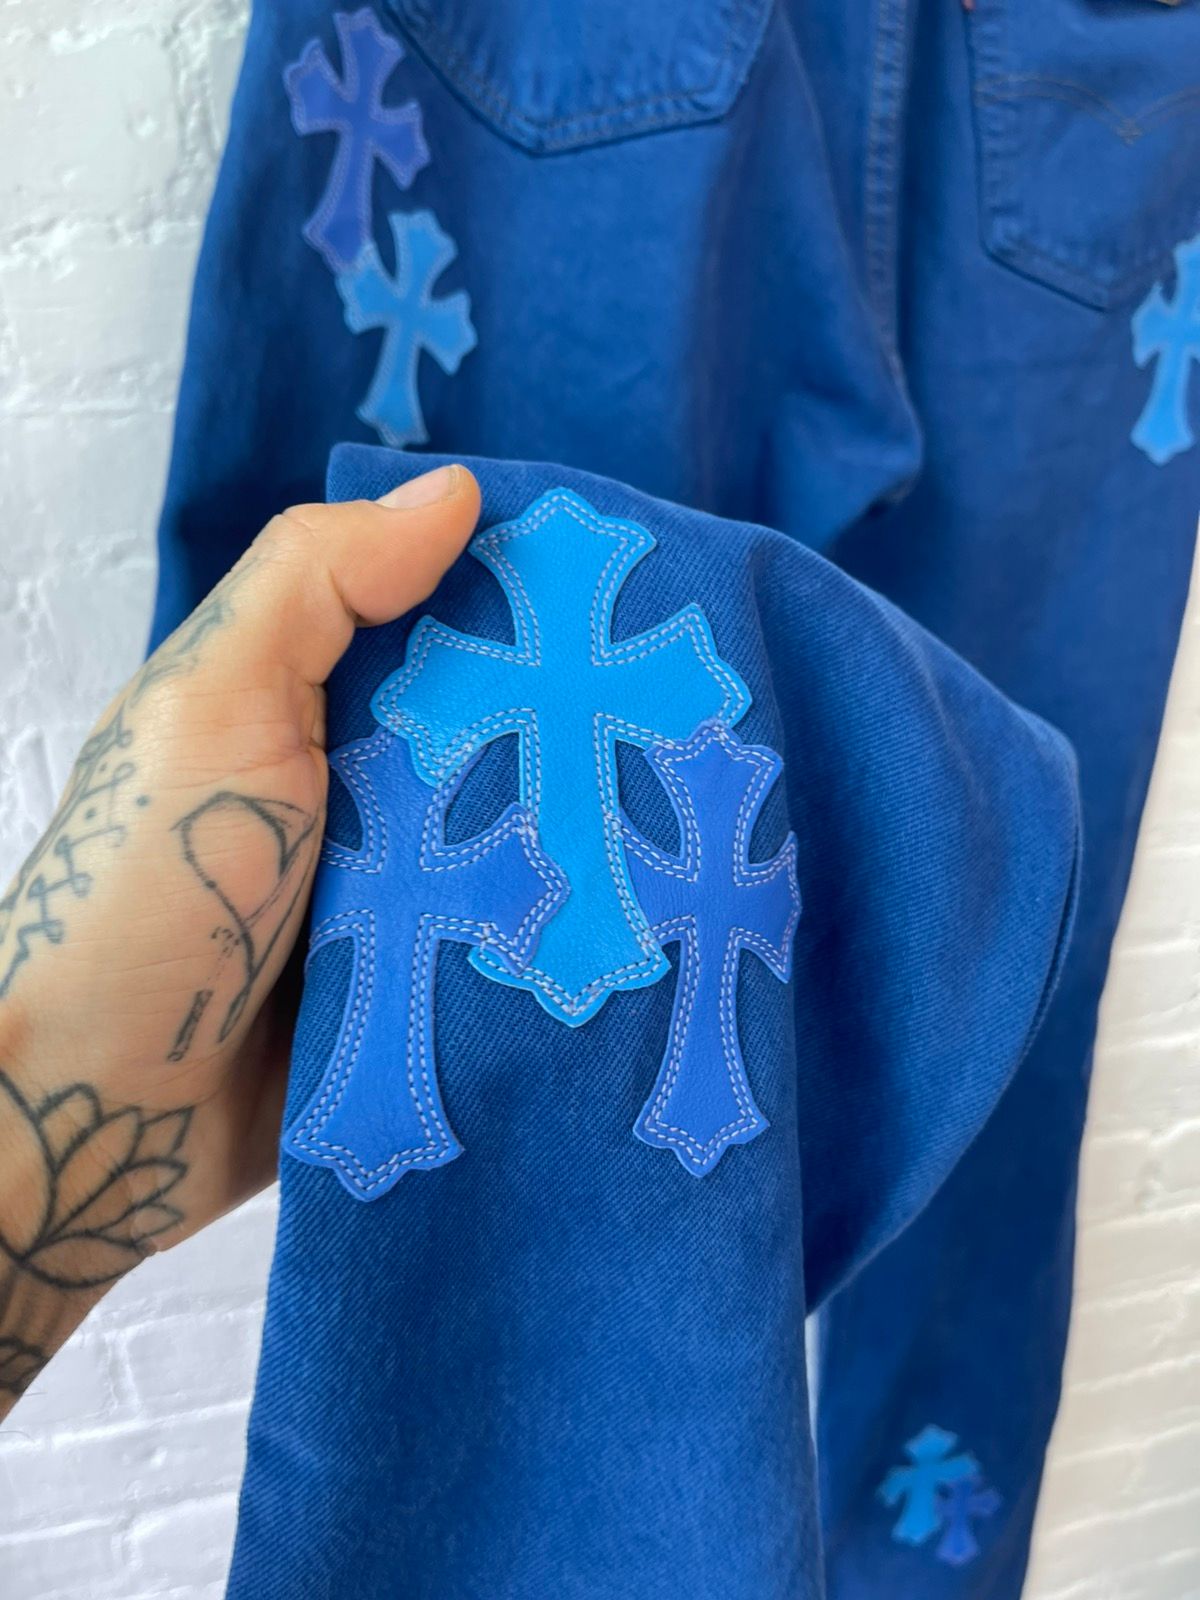 Chrome Hearts OFFSET PERSONAL UNRELEASED CROSS JEANS